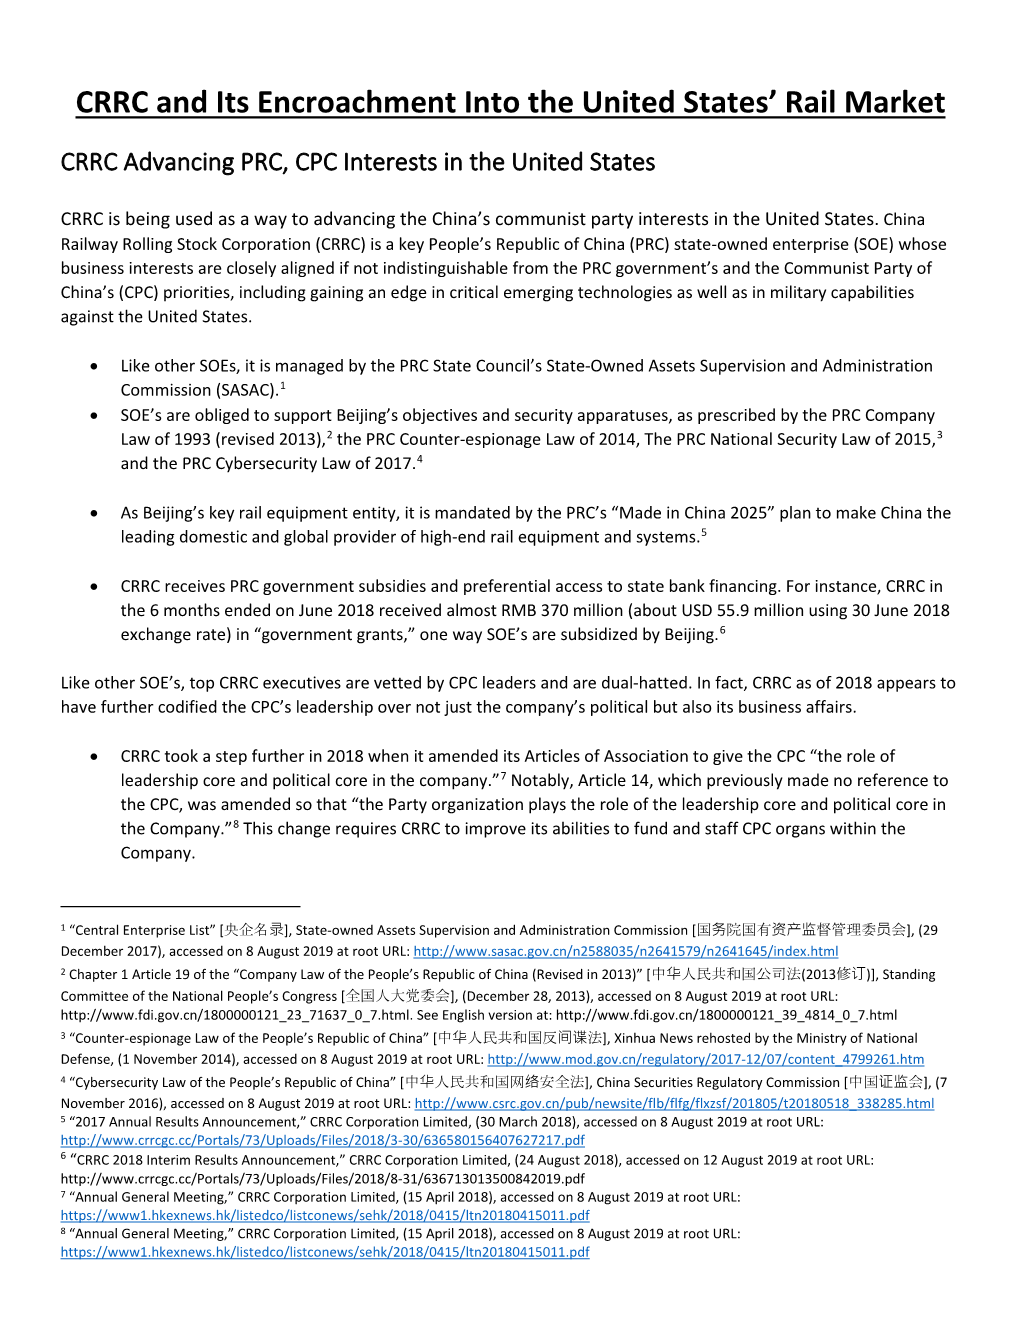 CRRC and Its Encroachment Into the United States' Rail Market (8/26/19)